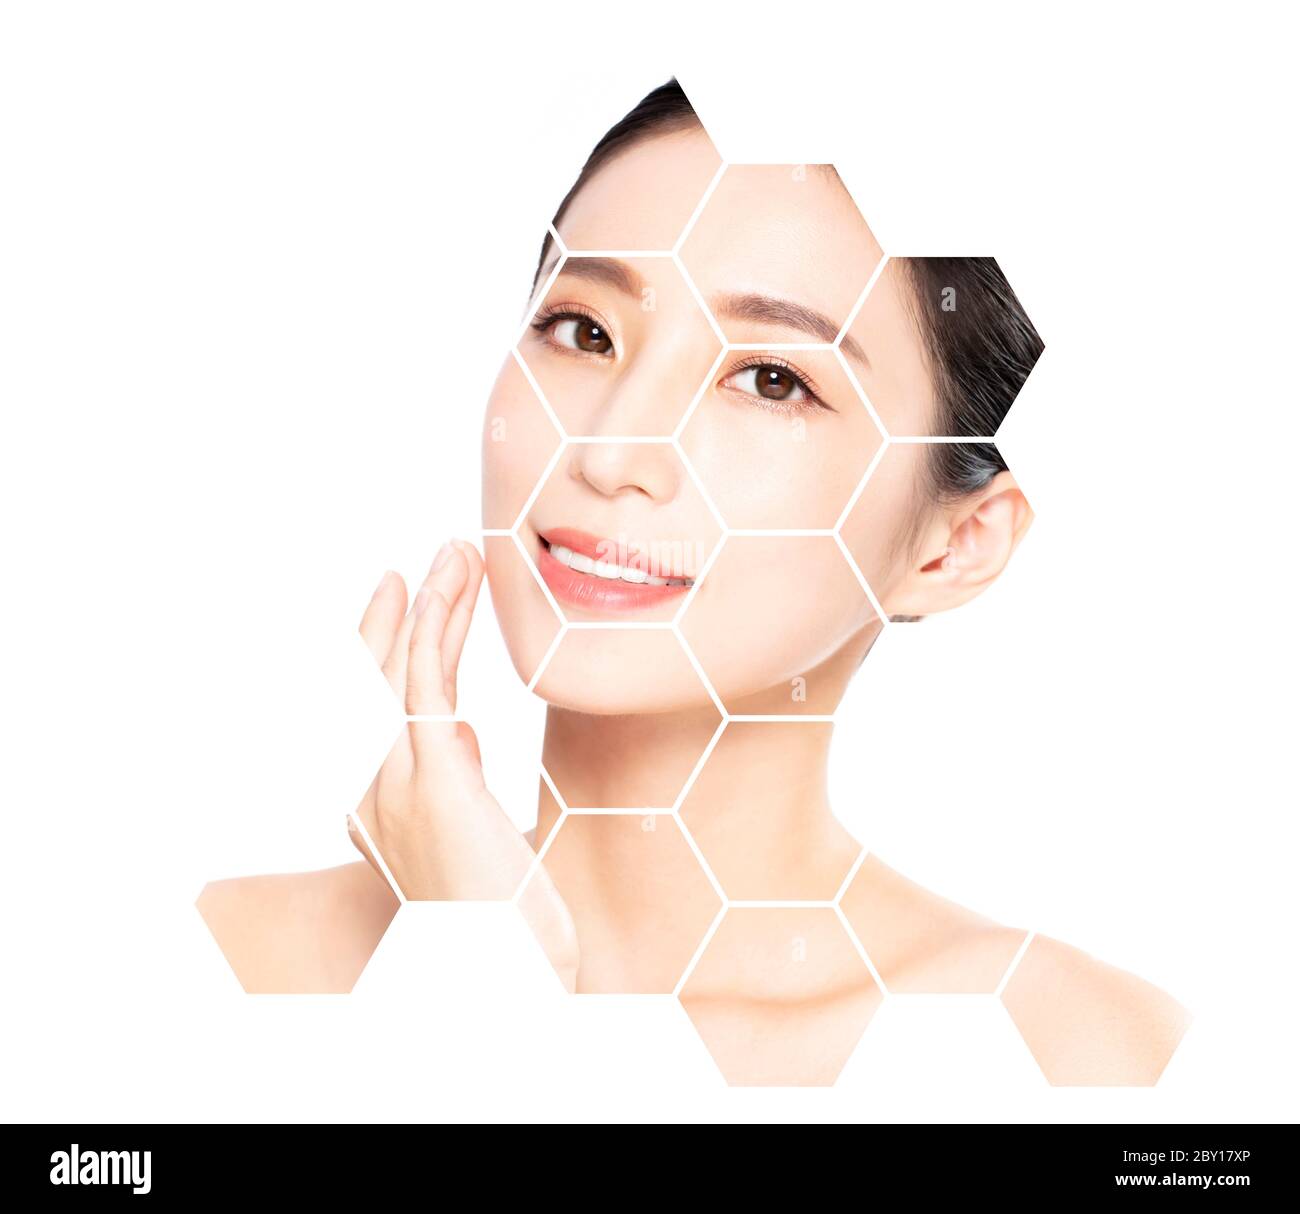 young beauty and Plastic surgery, skin lifting, cosmetics medicine concept Stock Photo